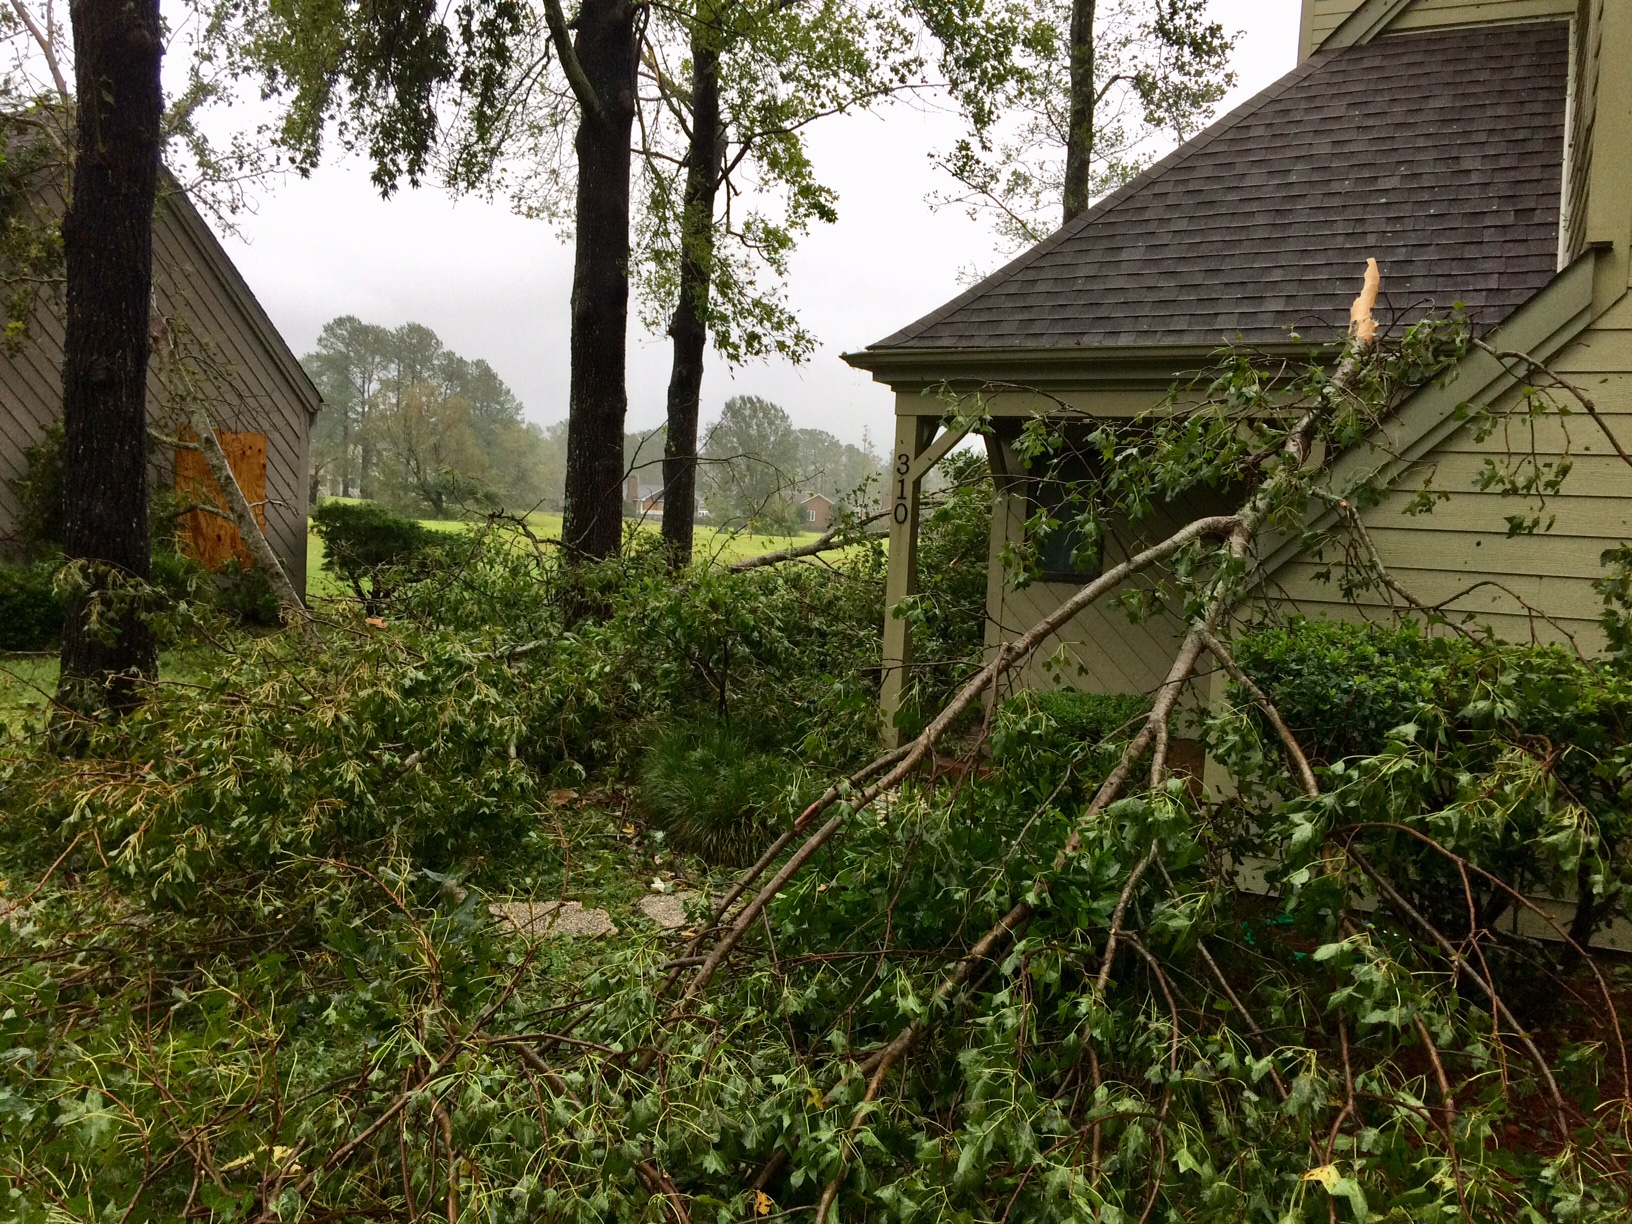 A picture of the writer's house with a tree fallen.